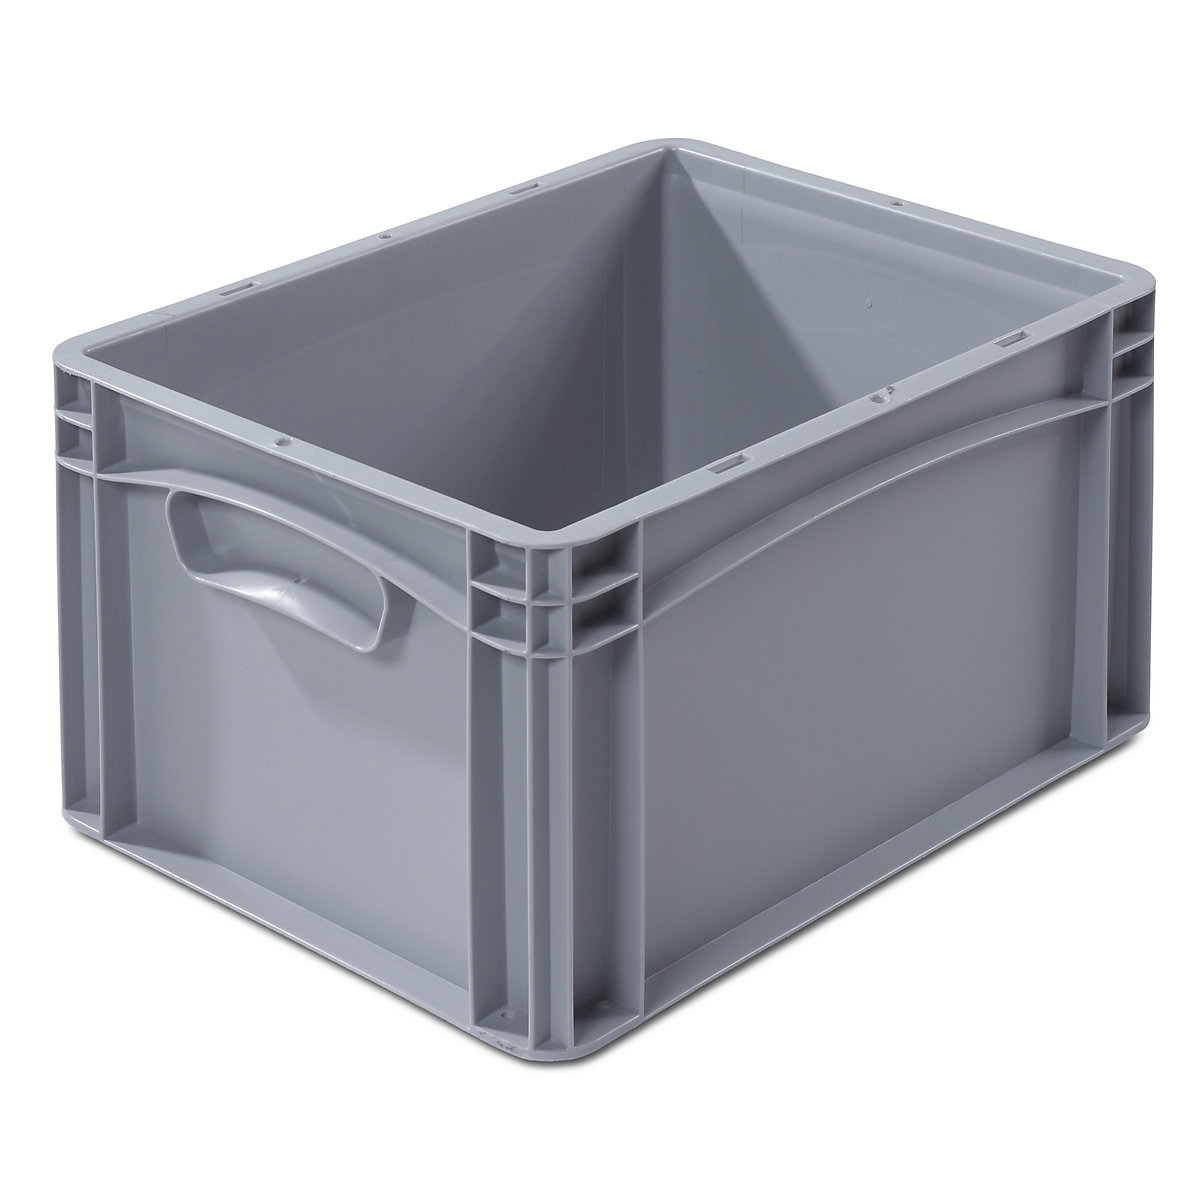 Euro size container, LxW 400 x 300 mm, solid walls and base, height 220 mm-3